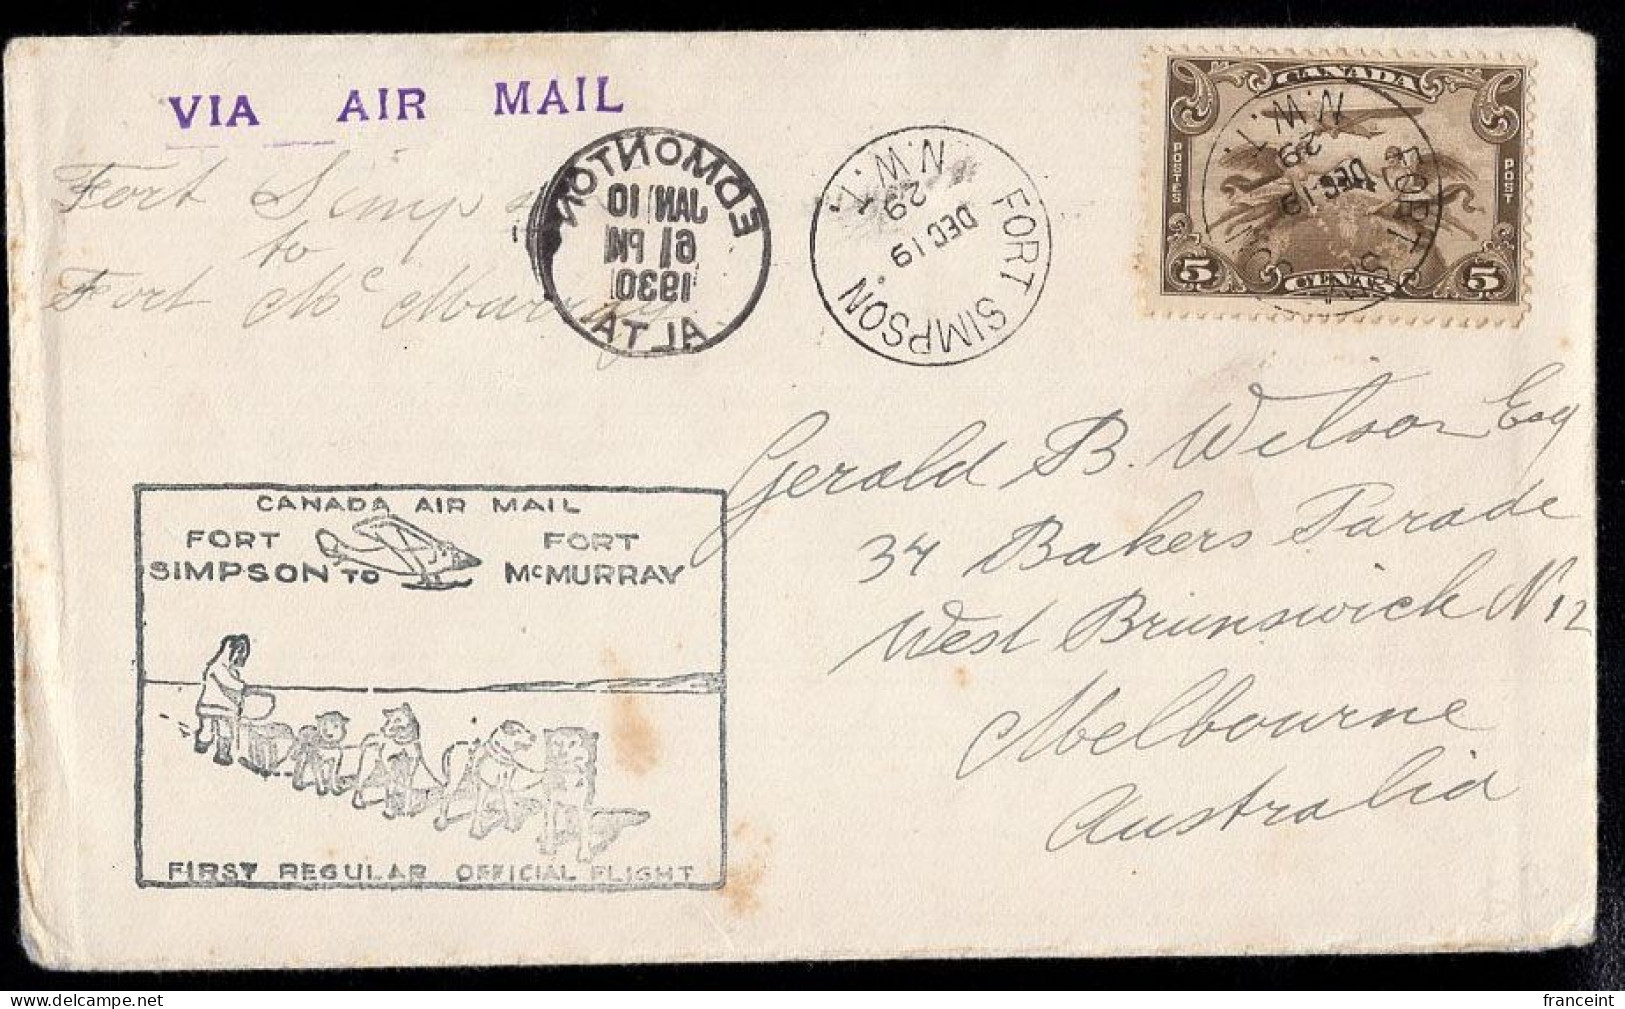 CANADA(1929) Dogsled Team. Mail Plane. First Flight Cover Fort Simpson To Fort McMurray With Delightful Cachet, Franked - Erst- U. Sonderflugbriefe